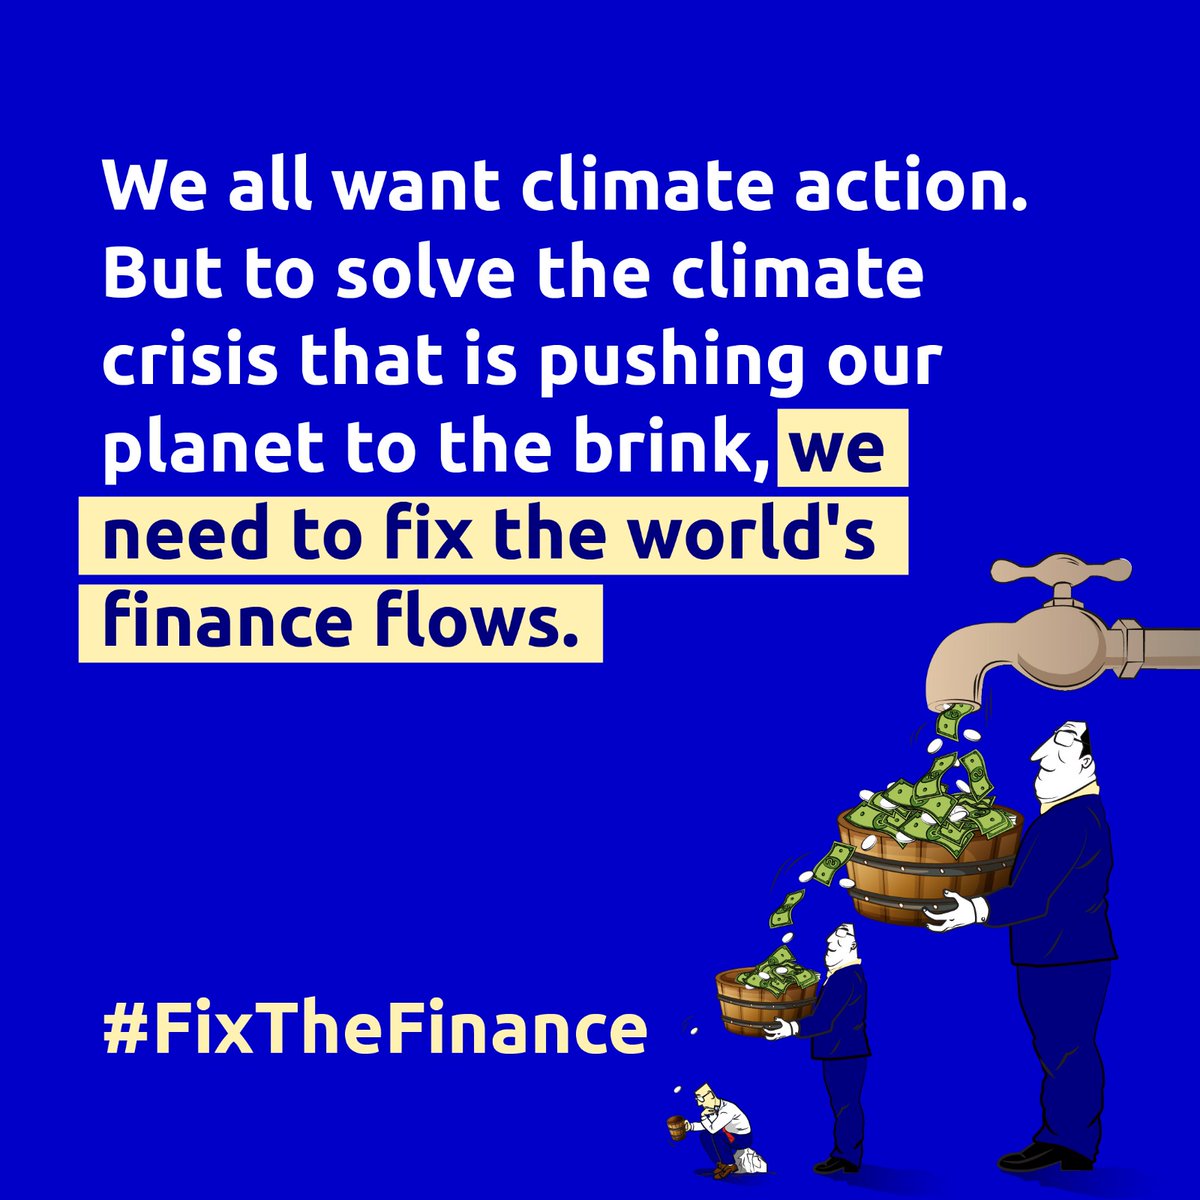 Banks, multilateral institutions and regional development banks are financing the fossil fuel and harmful industrial agriculture industries that are causing the climate crisis and destroying local communities.
#PayUp4LossAndDamage #ForPeopleForPlanet
#PeopleOverProfit.